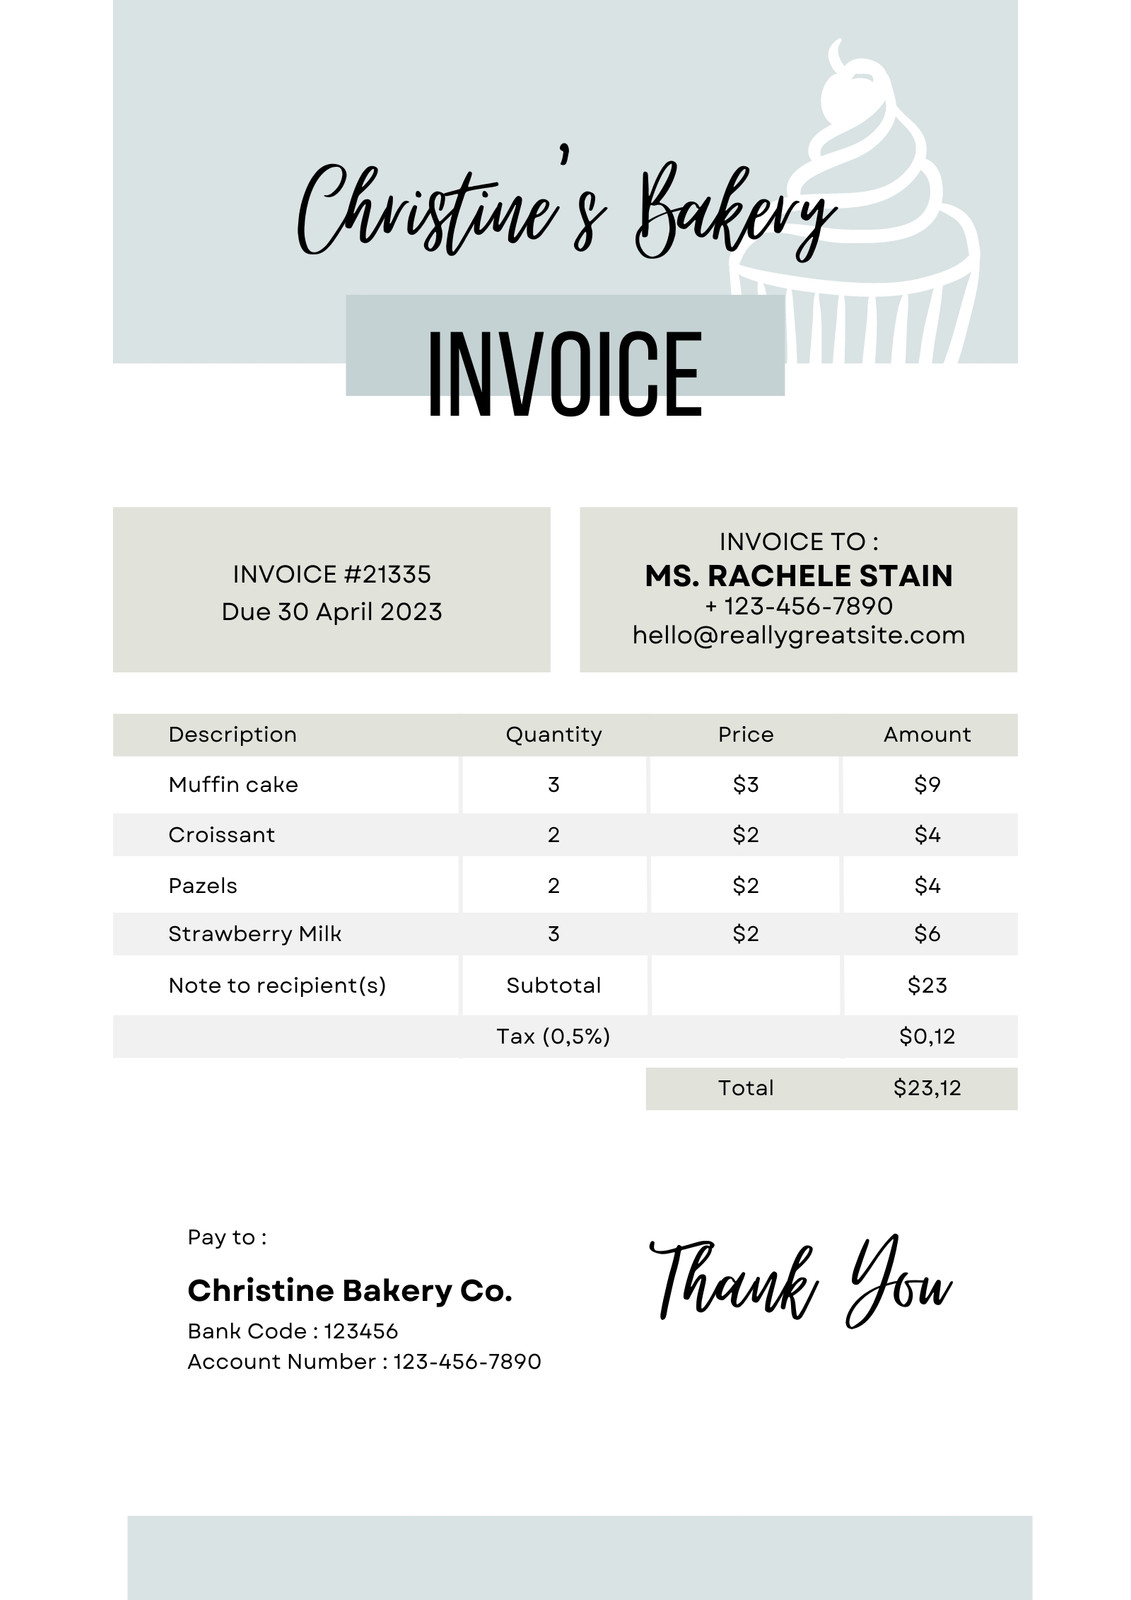 Page 3 - Free printable, customizable service invoice templates | Canva